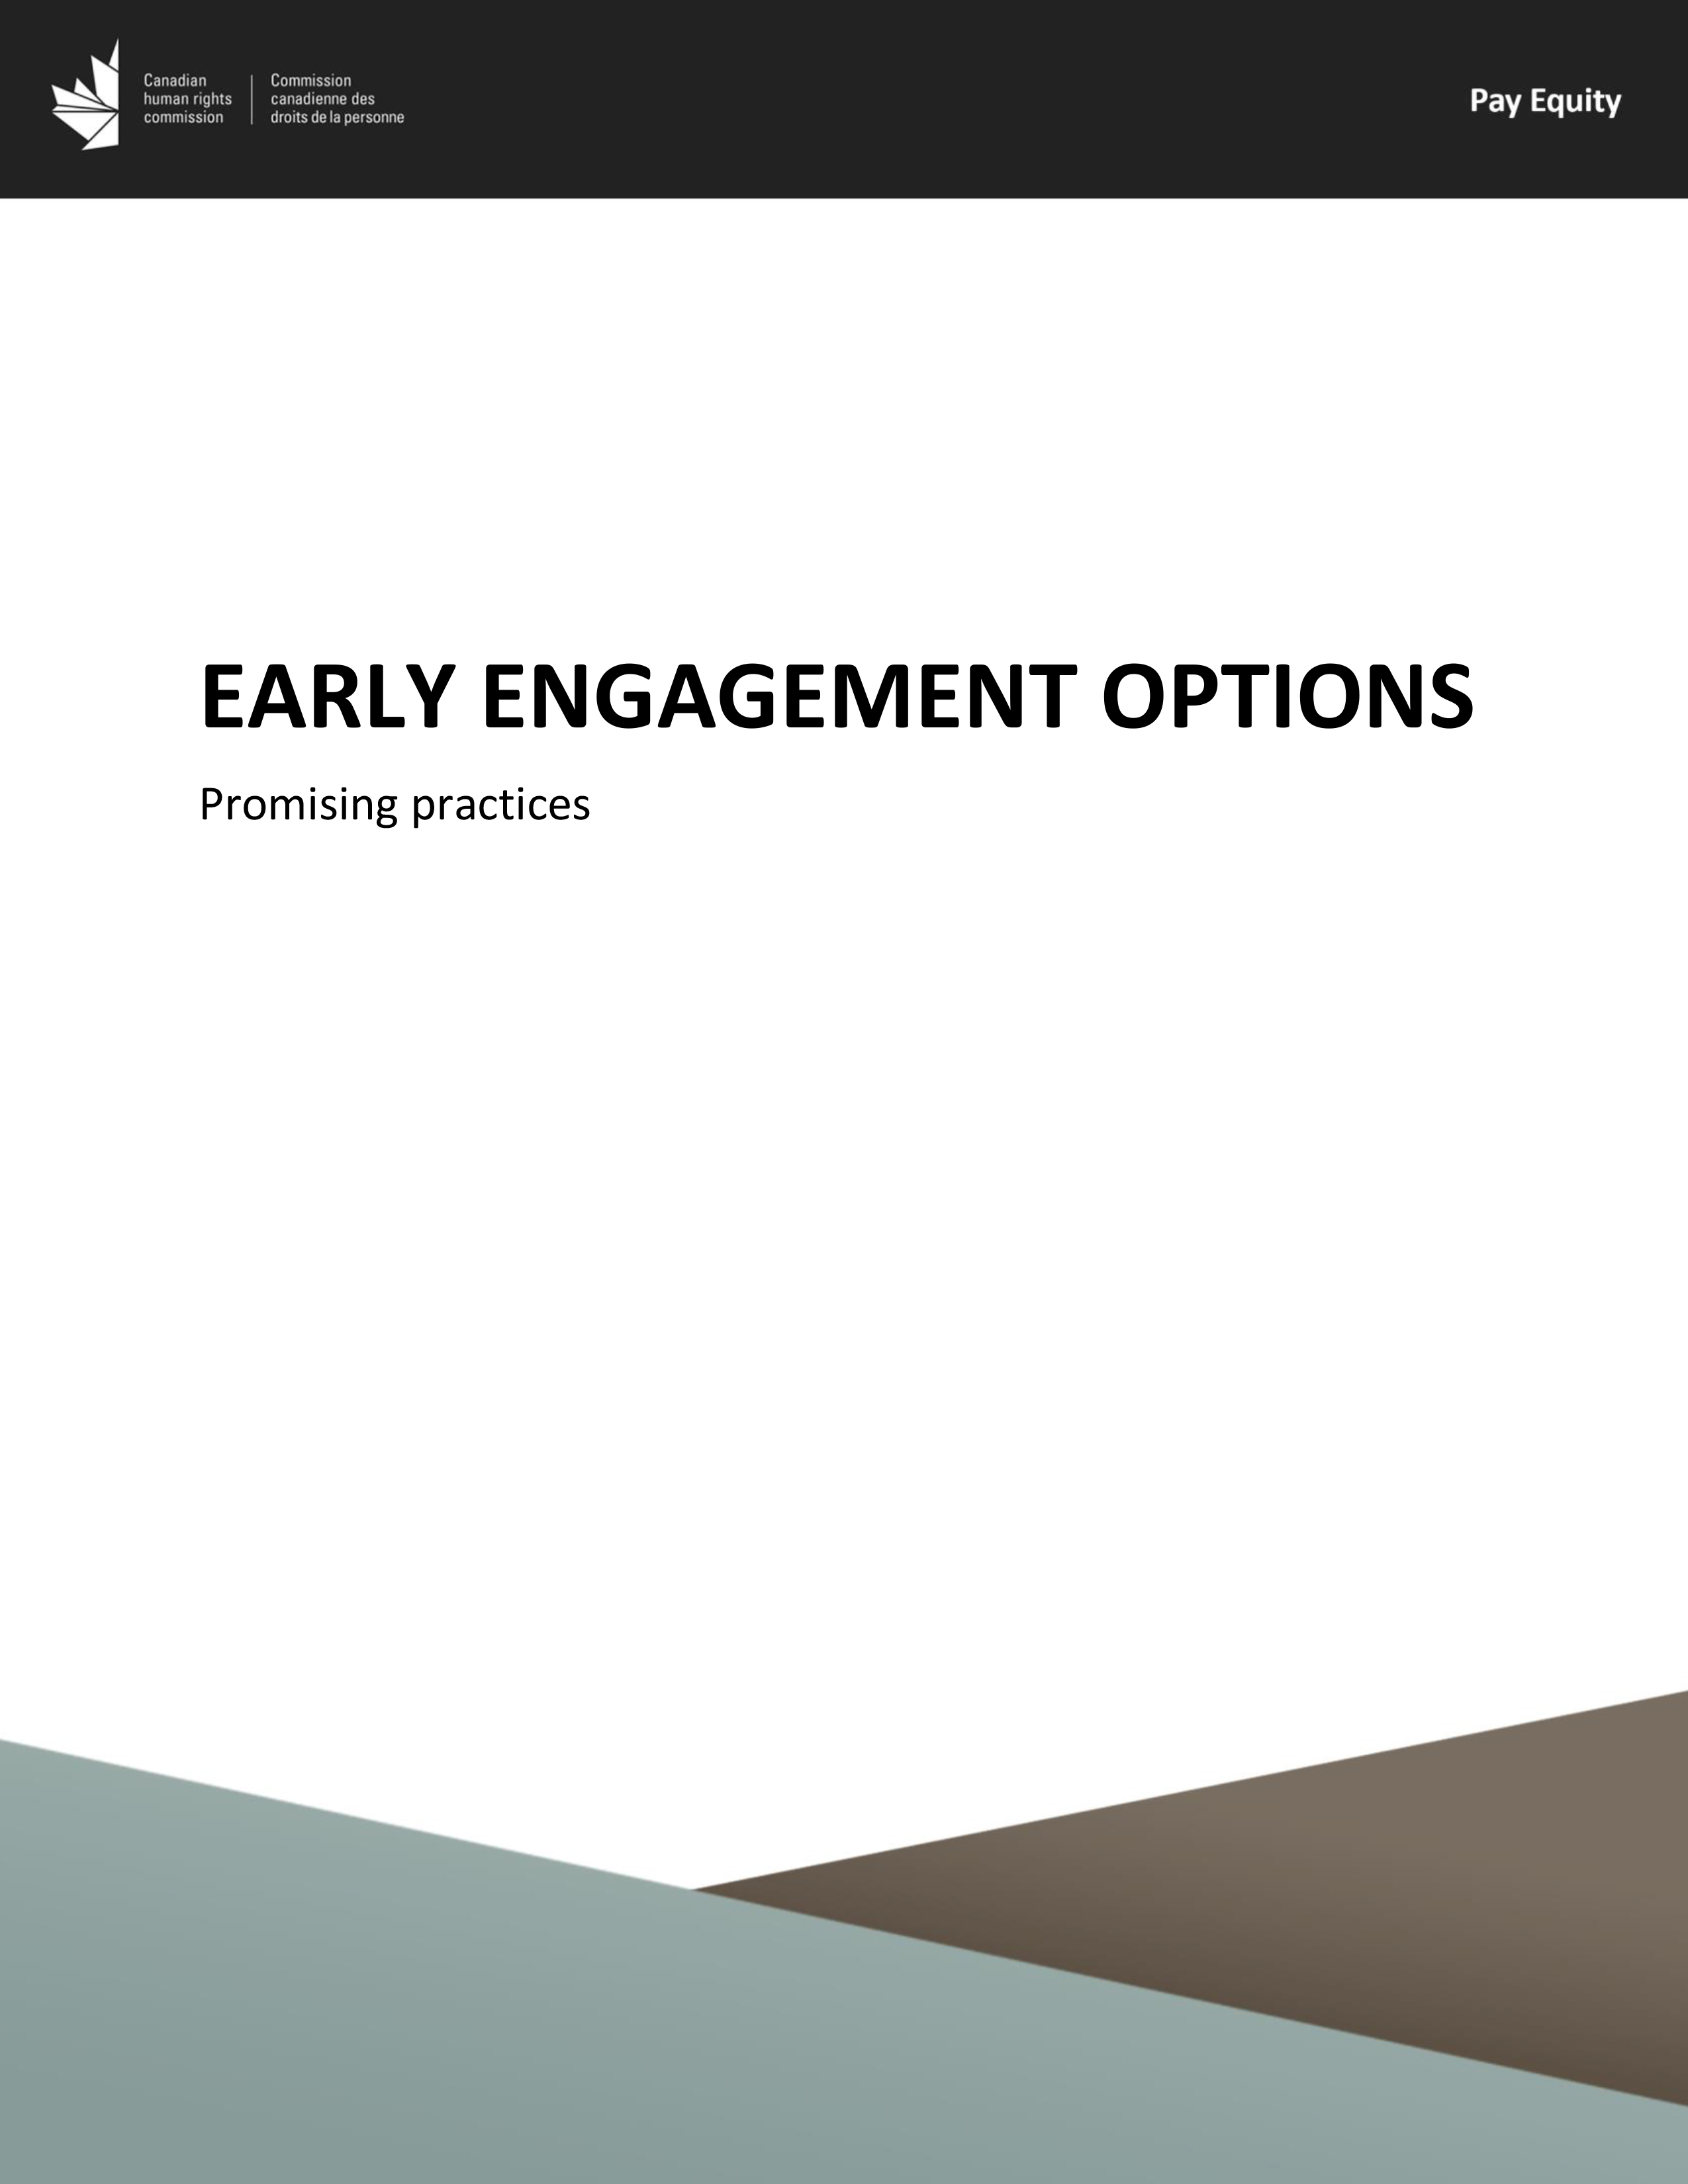 Promising practice - Early Engagement Options - Thumbnail